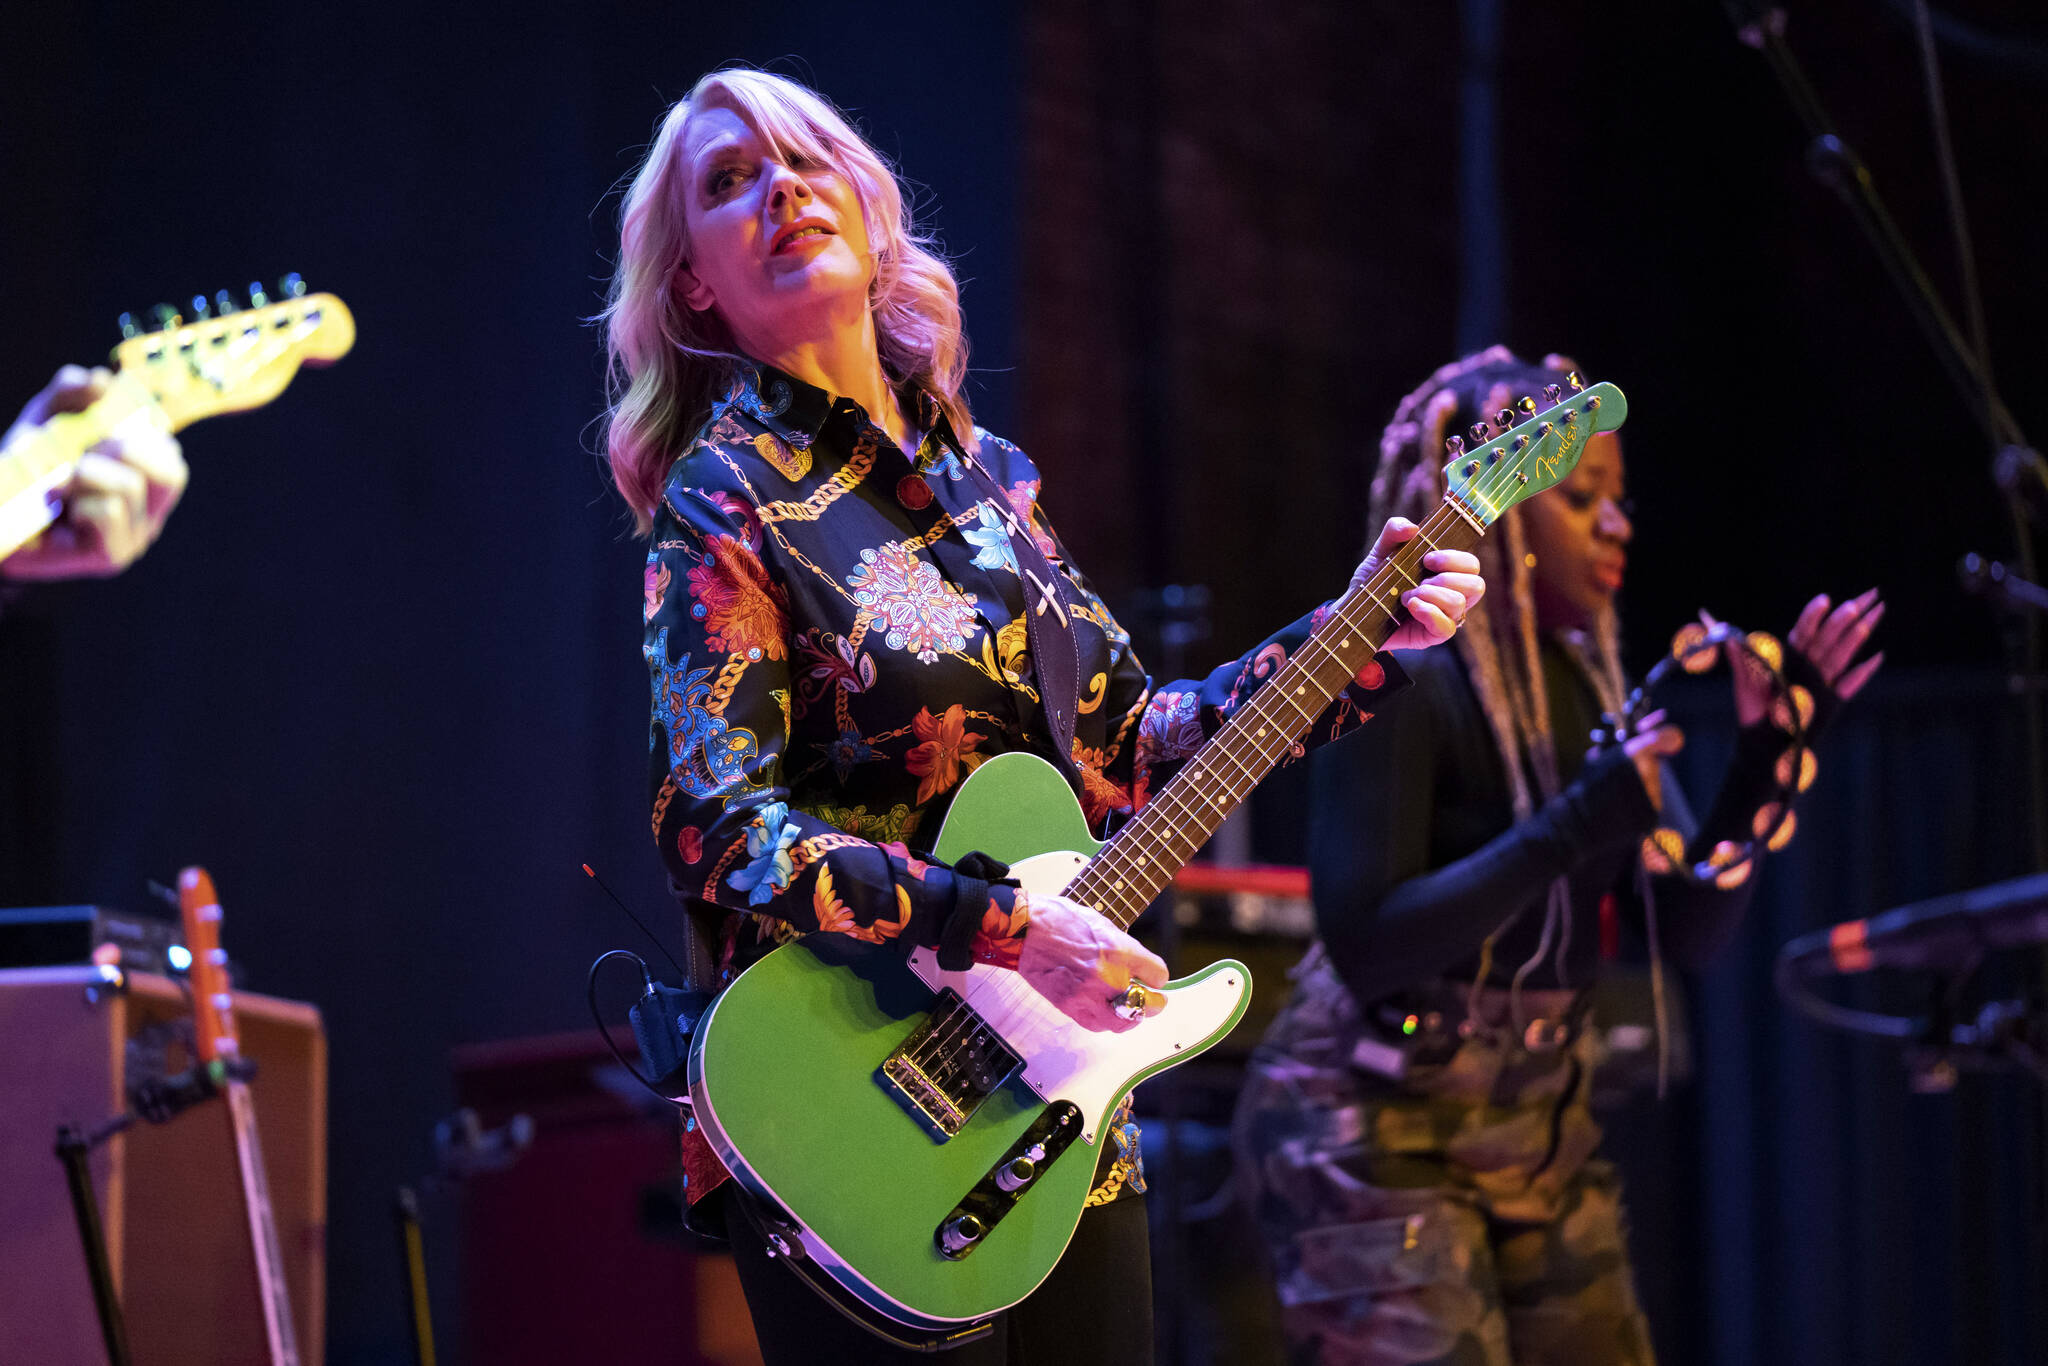 Nancy Wilson performs at the Des Plaines Theatre on Thursday, Oct. 20, 2022, in Des Plaines, Ill. (Photo by Rob Grabowski/Invision/AP)